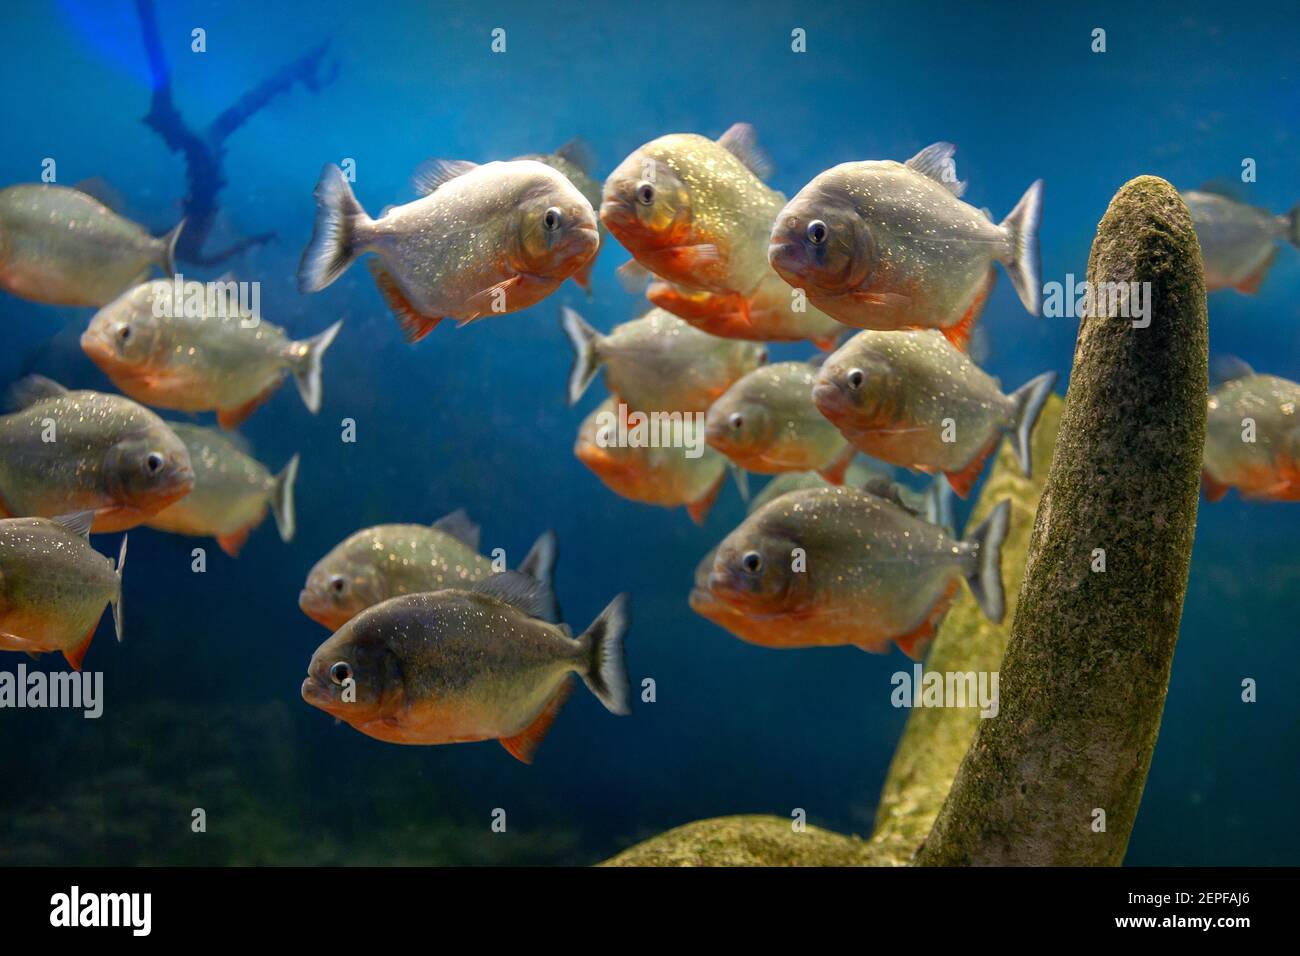 group of red piranha fishes in underwater stones at blue gradient background. wildlife animals. danger and aggressive amazon fish Stock Photo